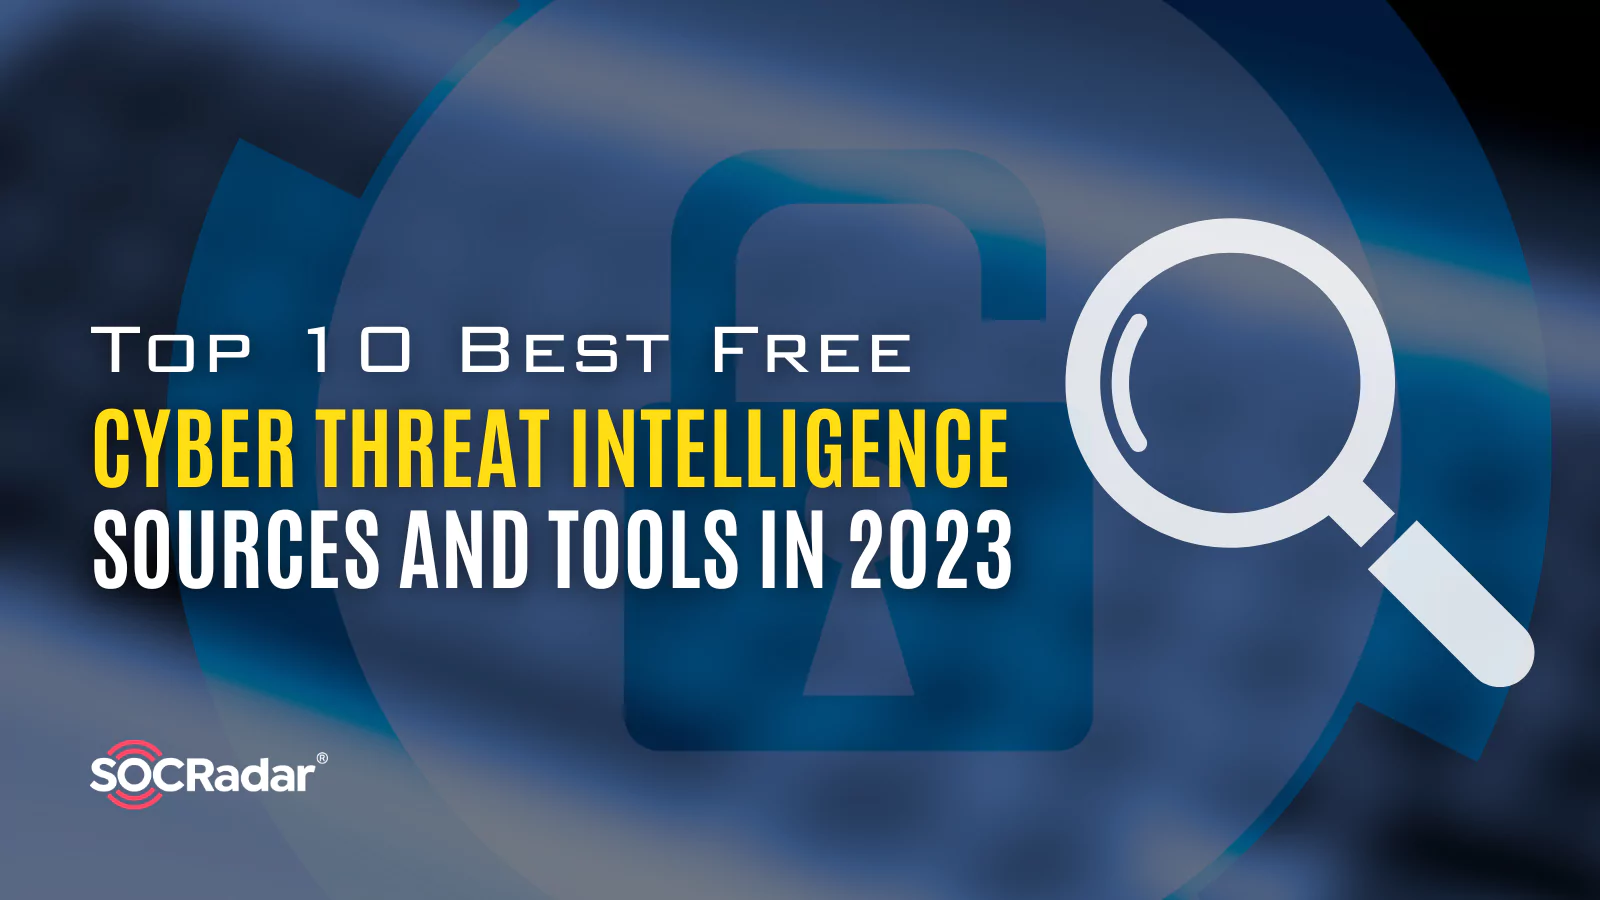 SOCRadar® Cyber Intelligence Inc. | Top 10 Best Free Cyber Threat Intelligence Sources and Tools in 2023